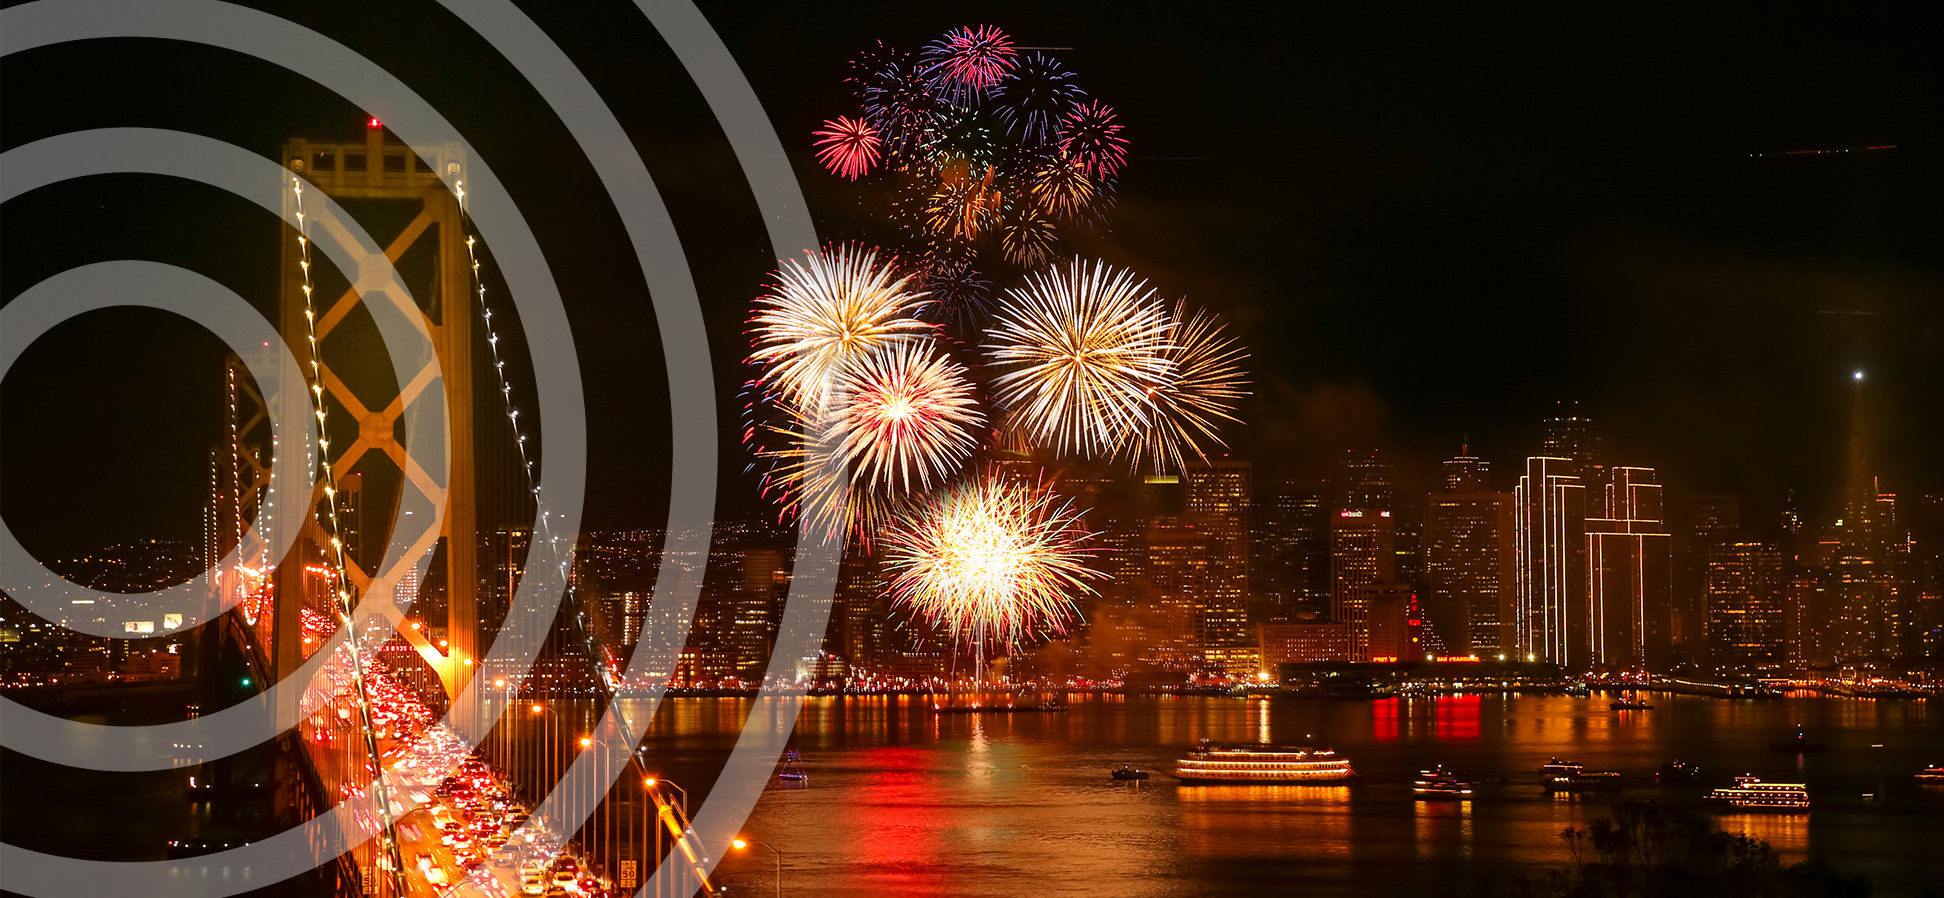 Where To Park In San Francisco For 4th of July Fireworks at Pier 39